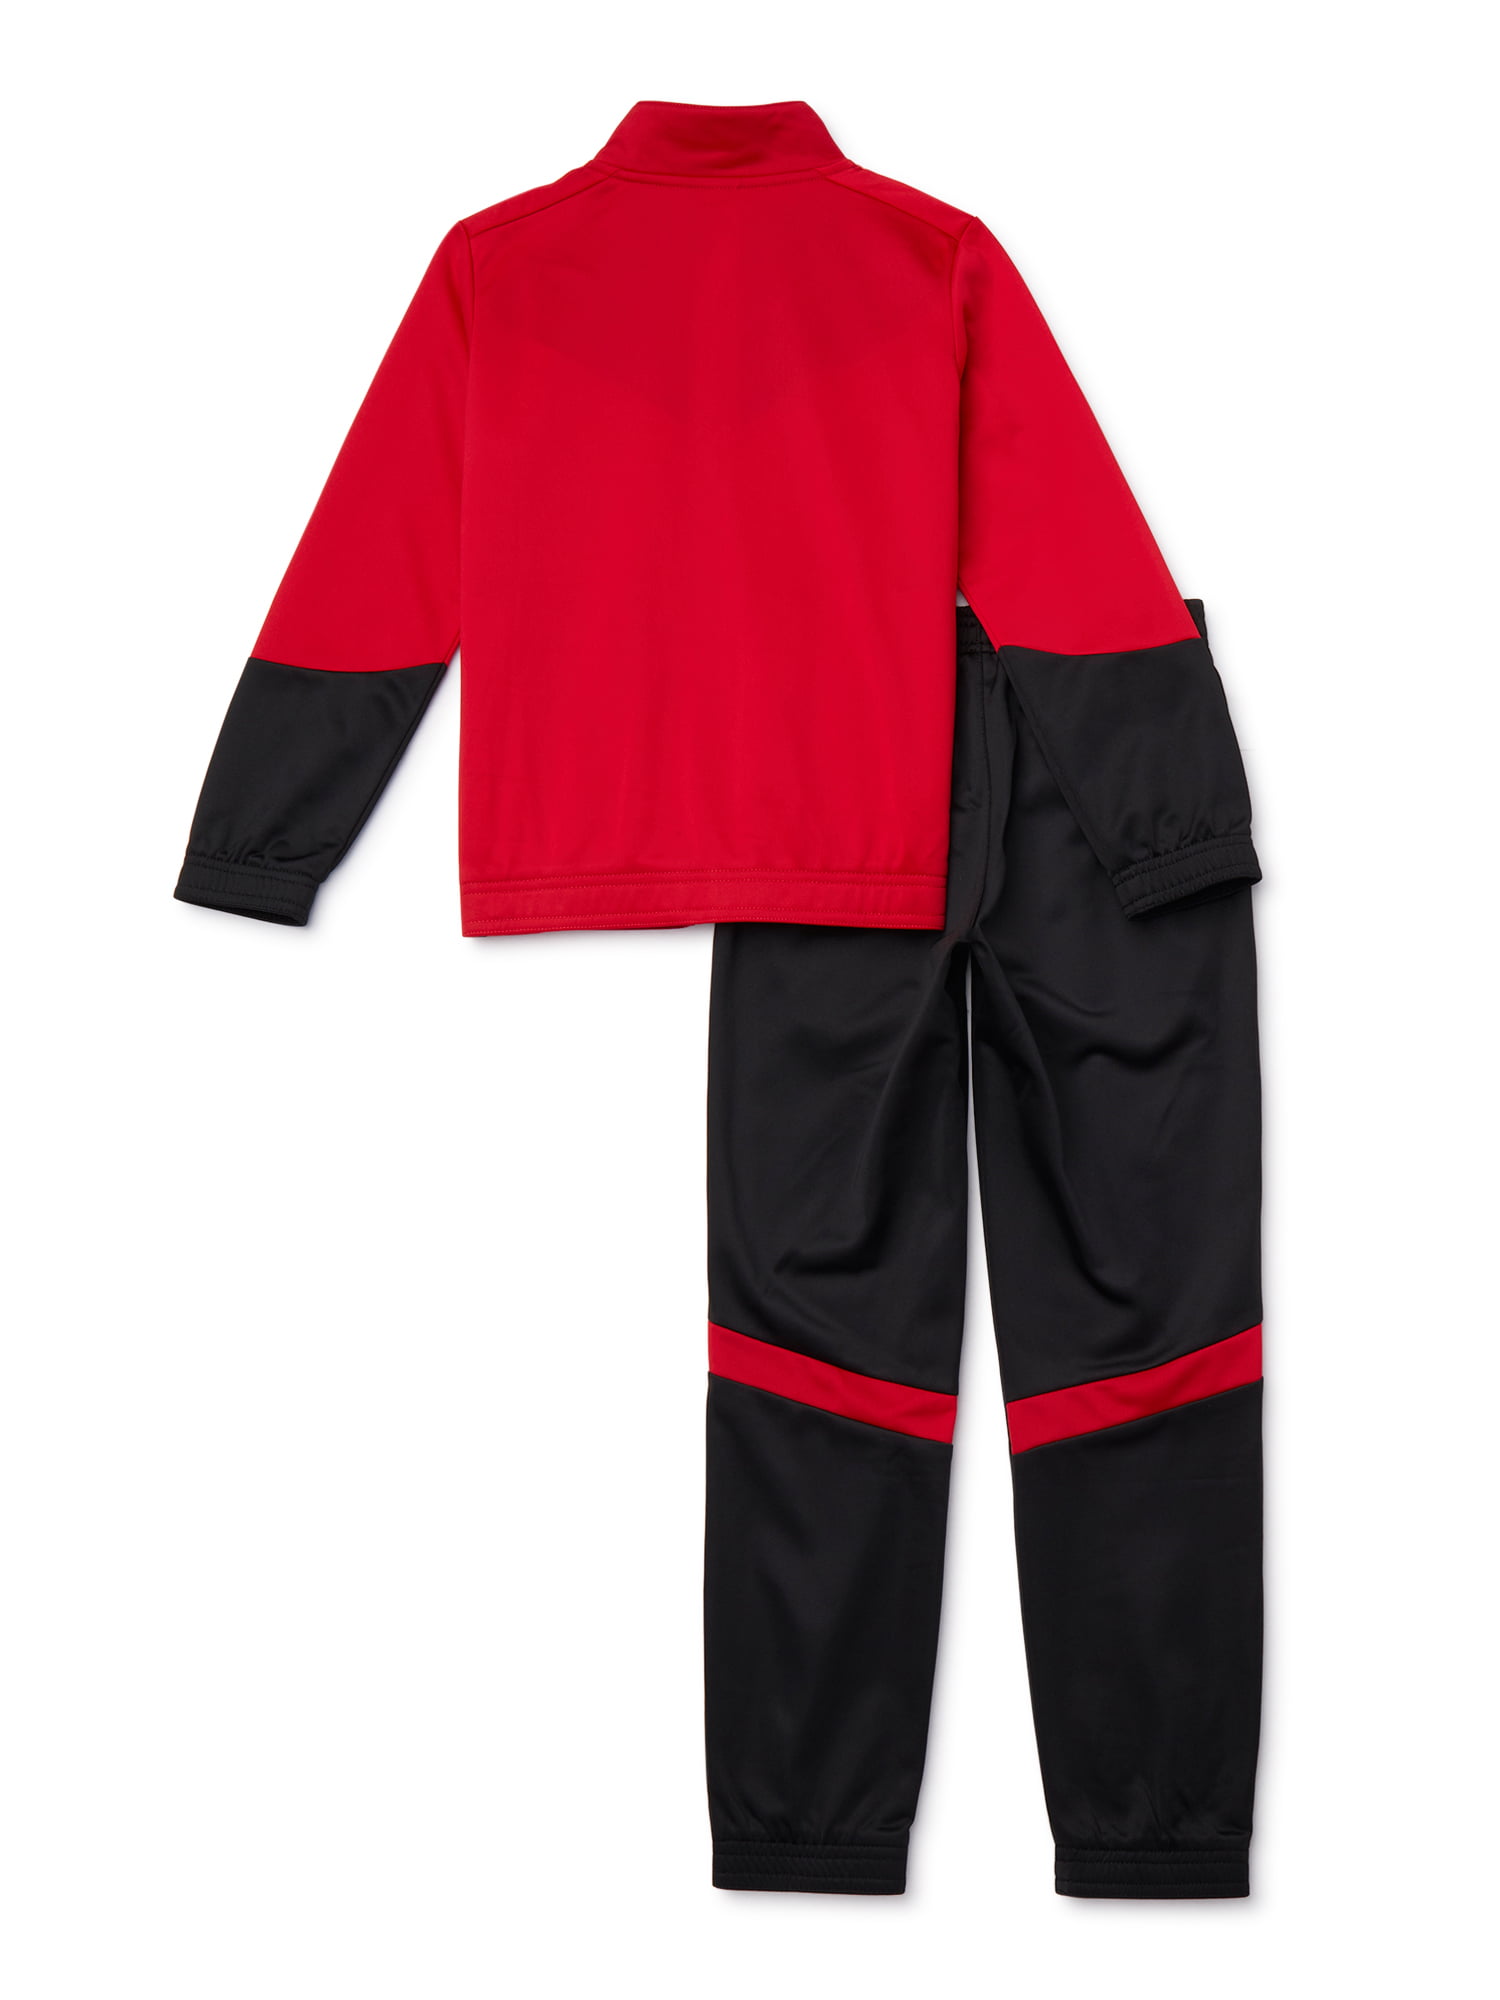 BOYS BLUE TRACKSUIT SET Football, Sports Ages 4 years to 14 Years